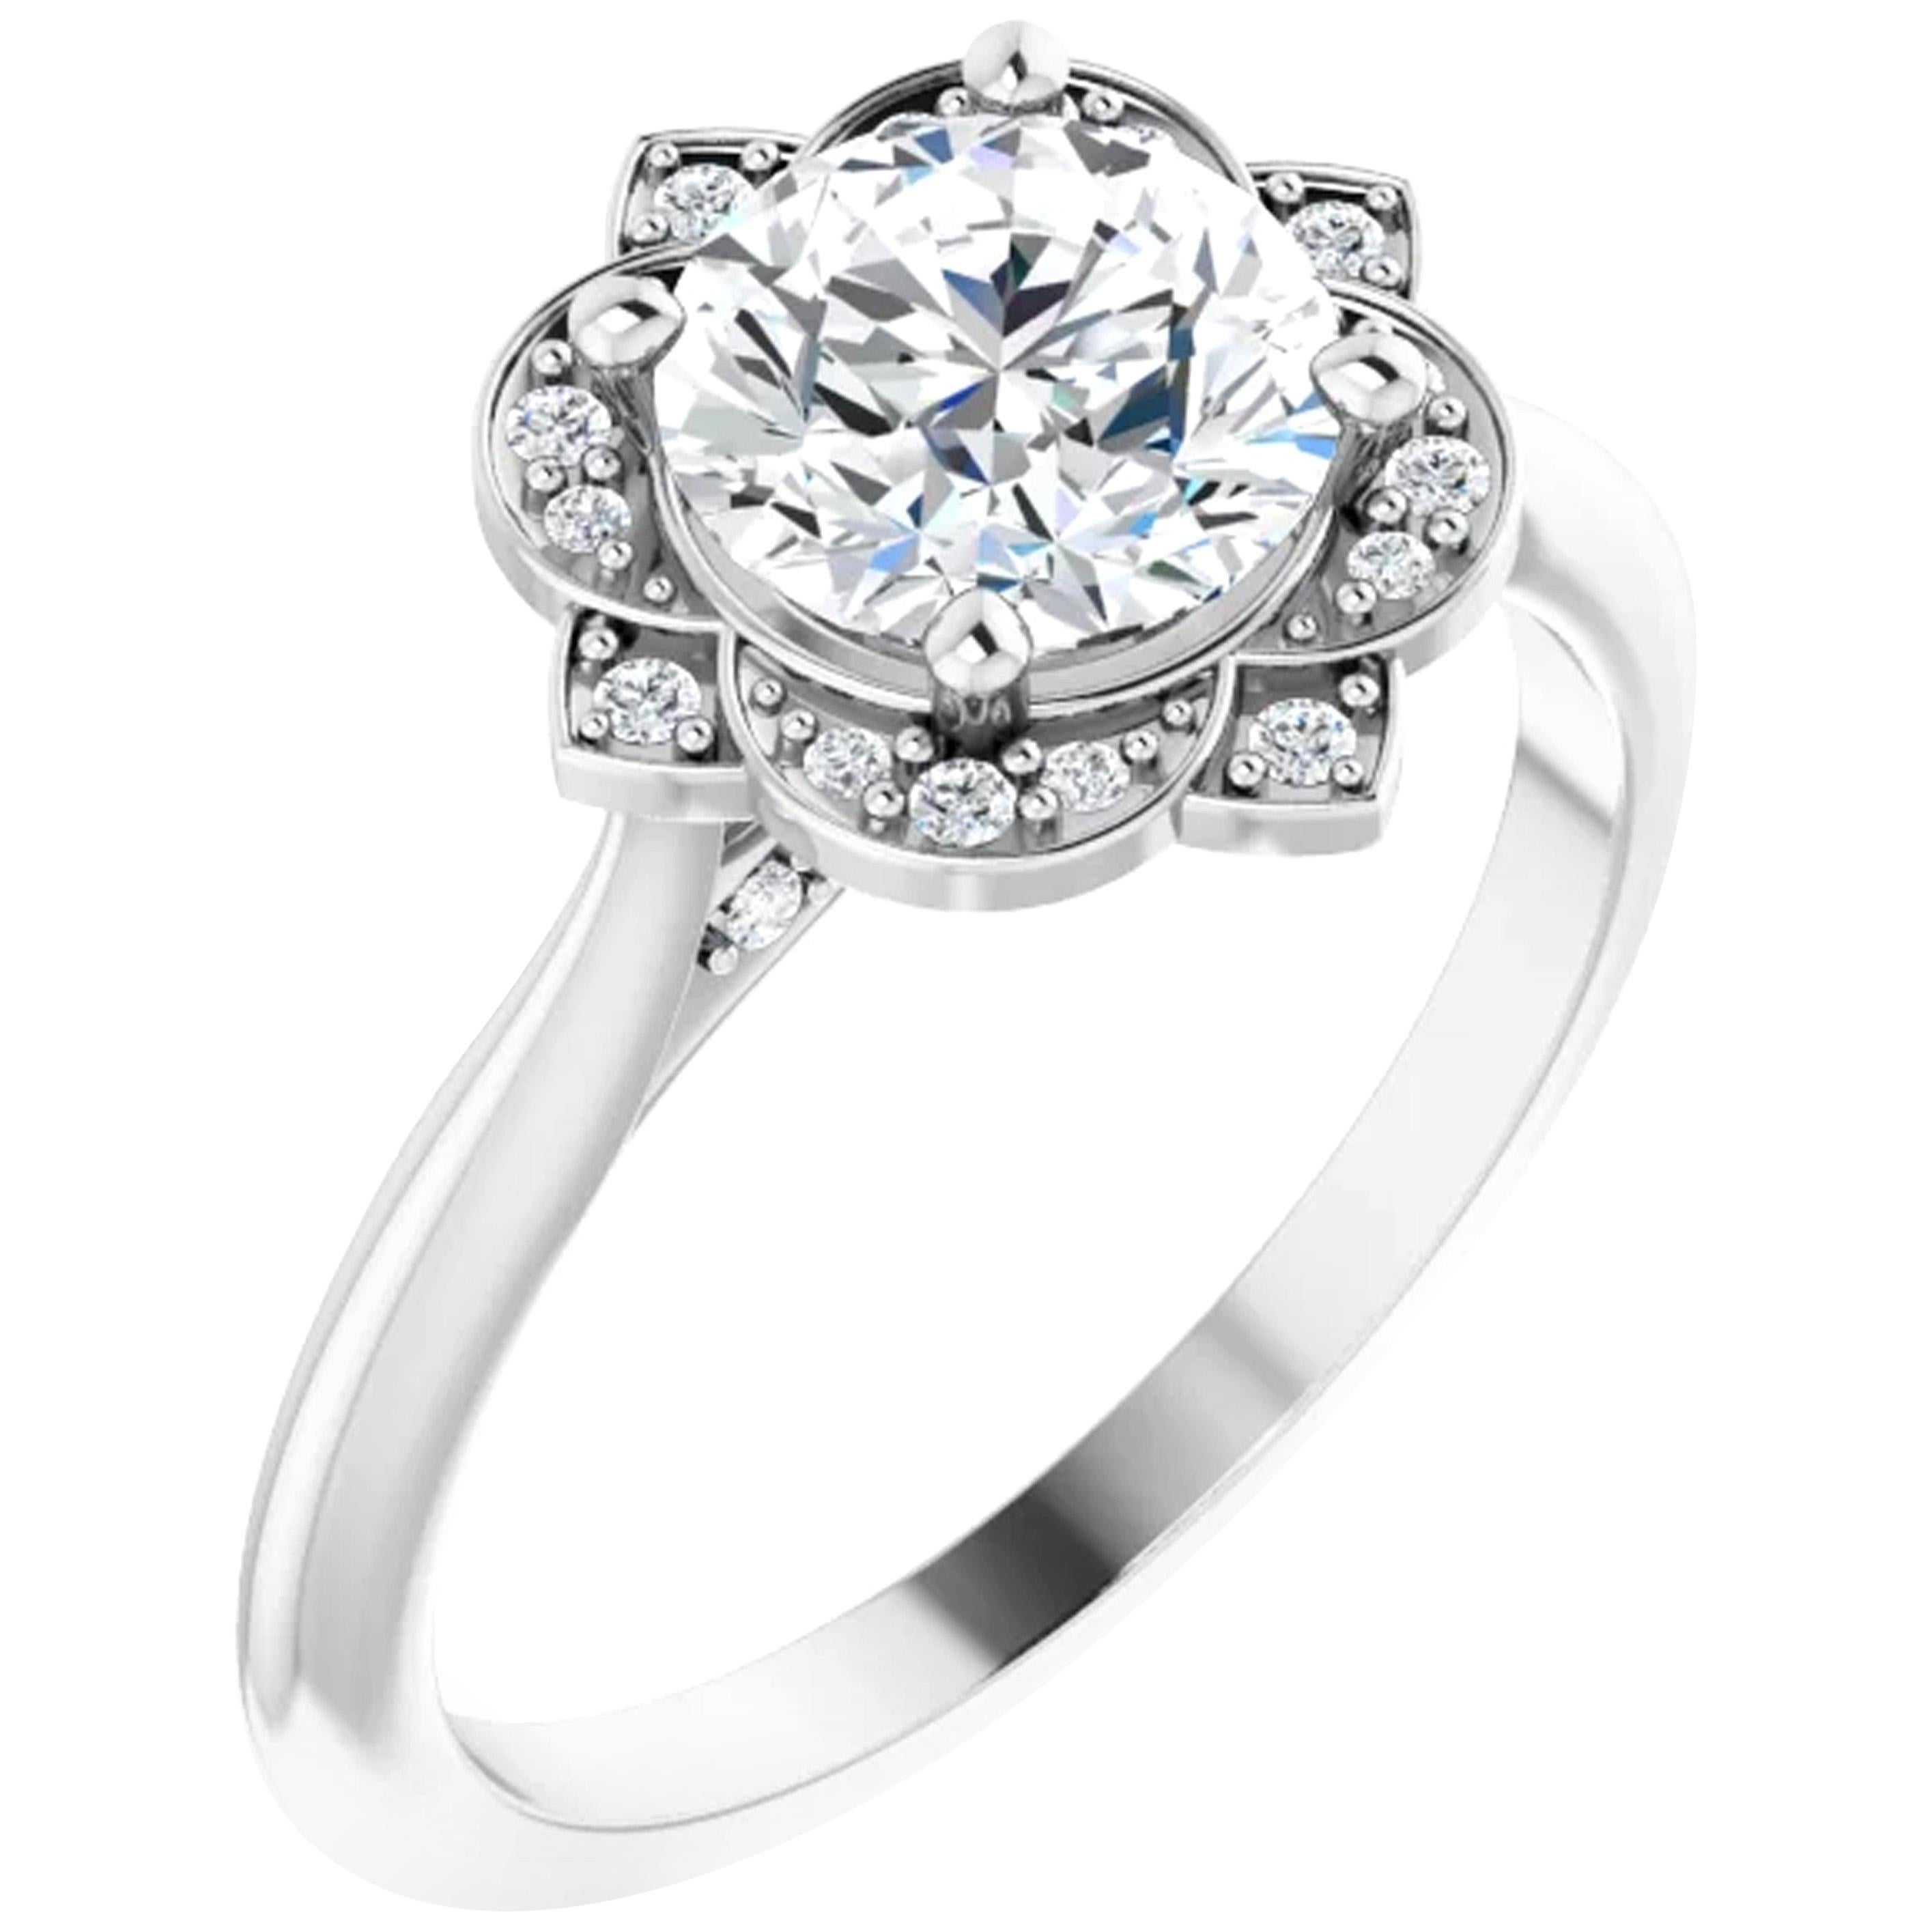 Vintage Inspired Halo Design GIA Certified Round Diamond Wedding Engagement Ring For Sale